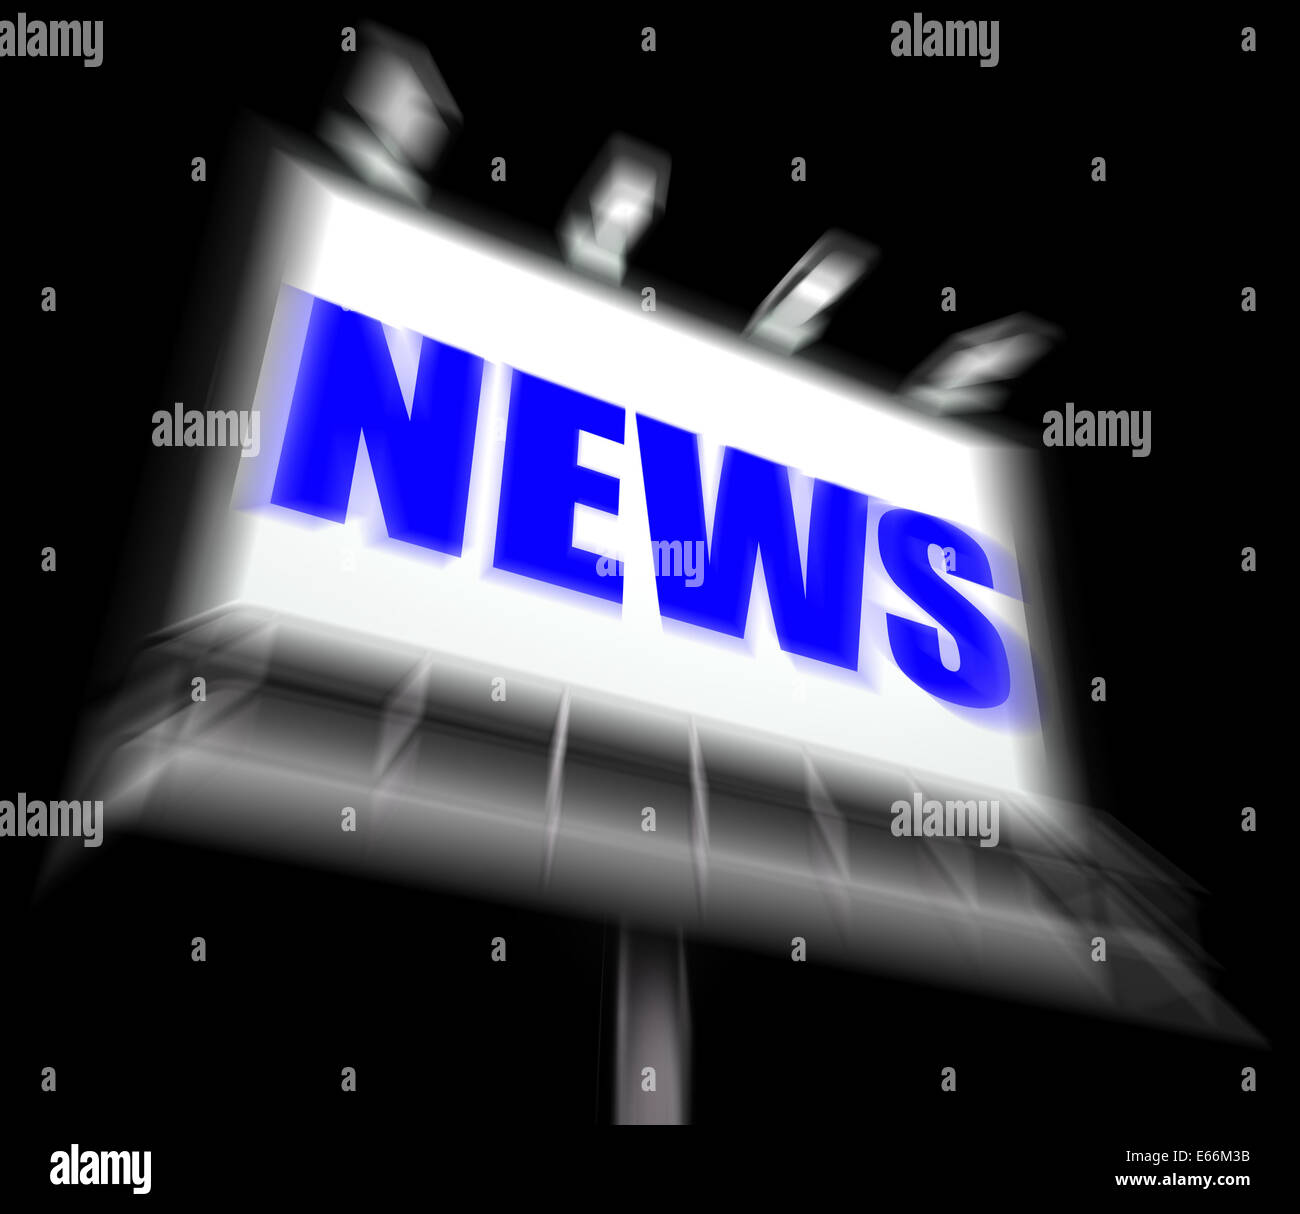 News Sign Displaying Newspaper Articles and Headlines or Media Info Stock Photo